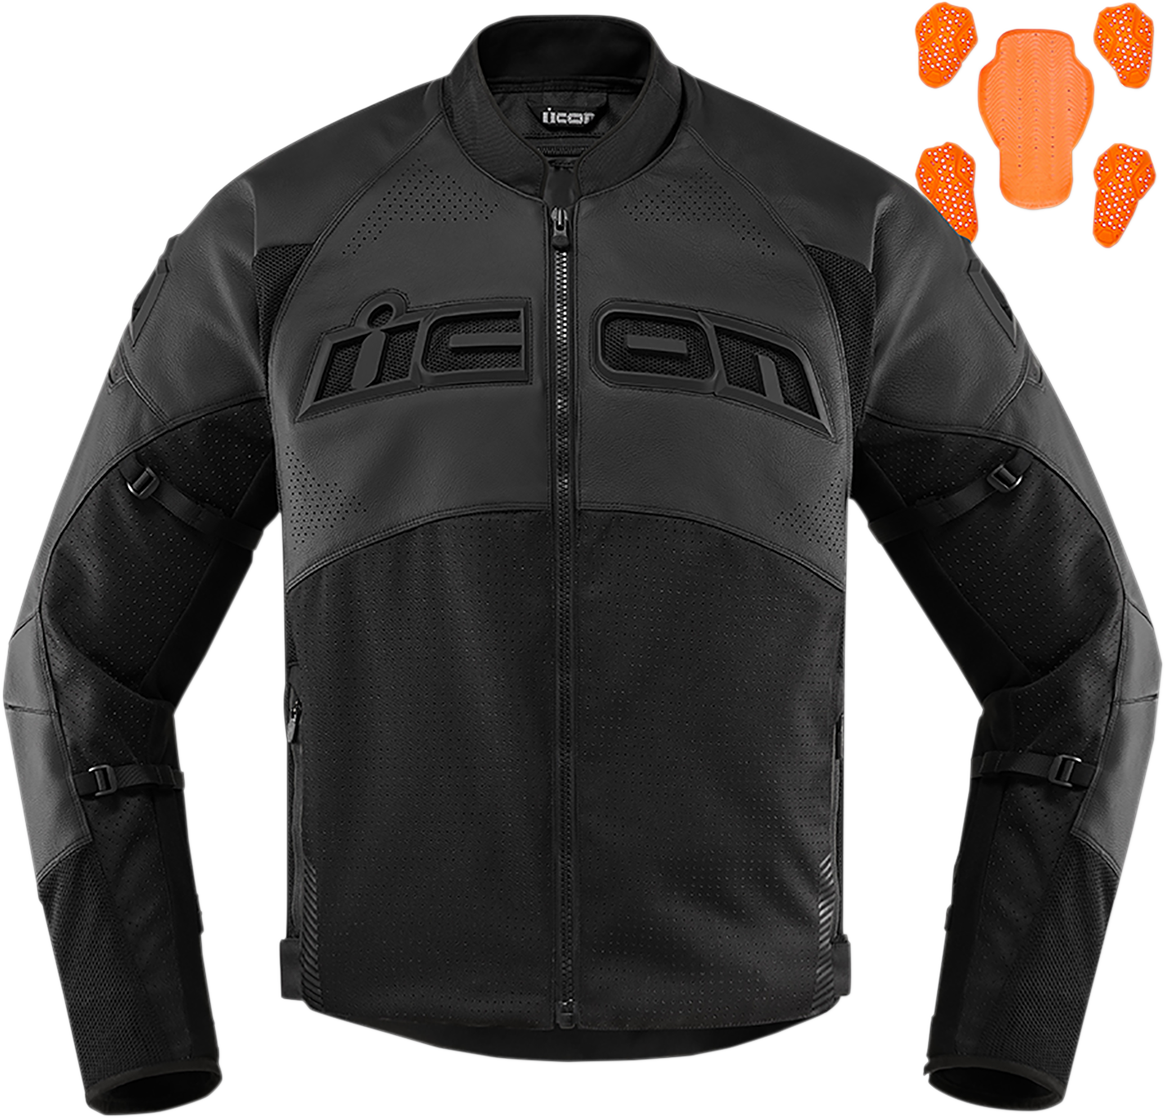 ICON Contra2™ Perf CE Jacket - Stealth - XL 2810-3663